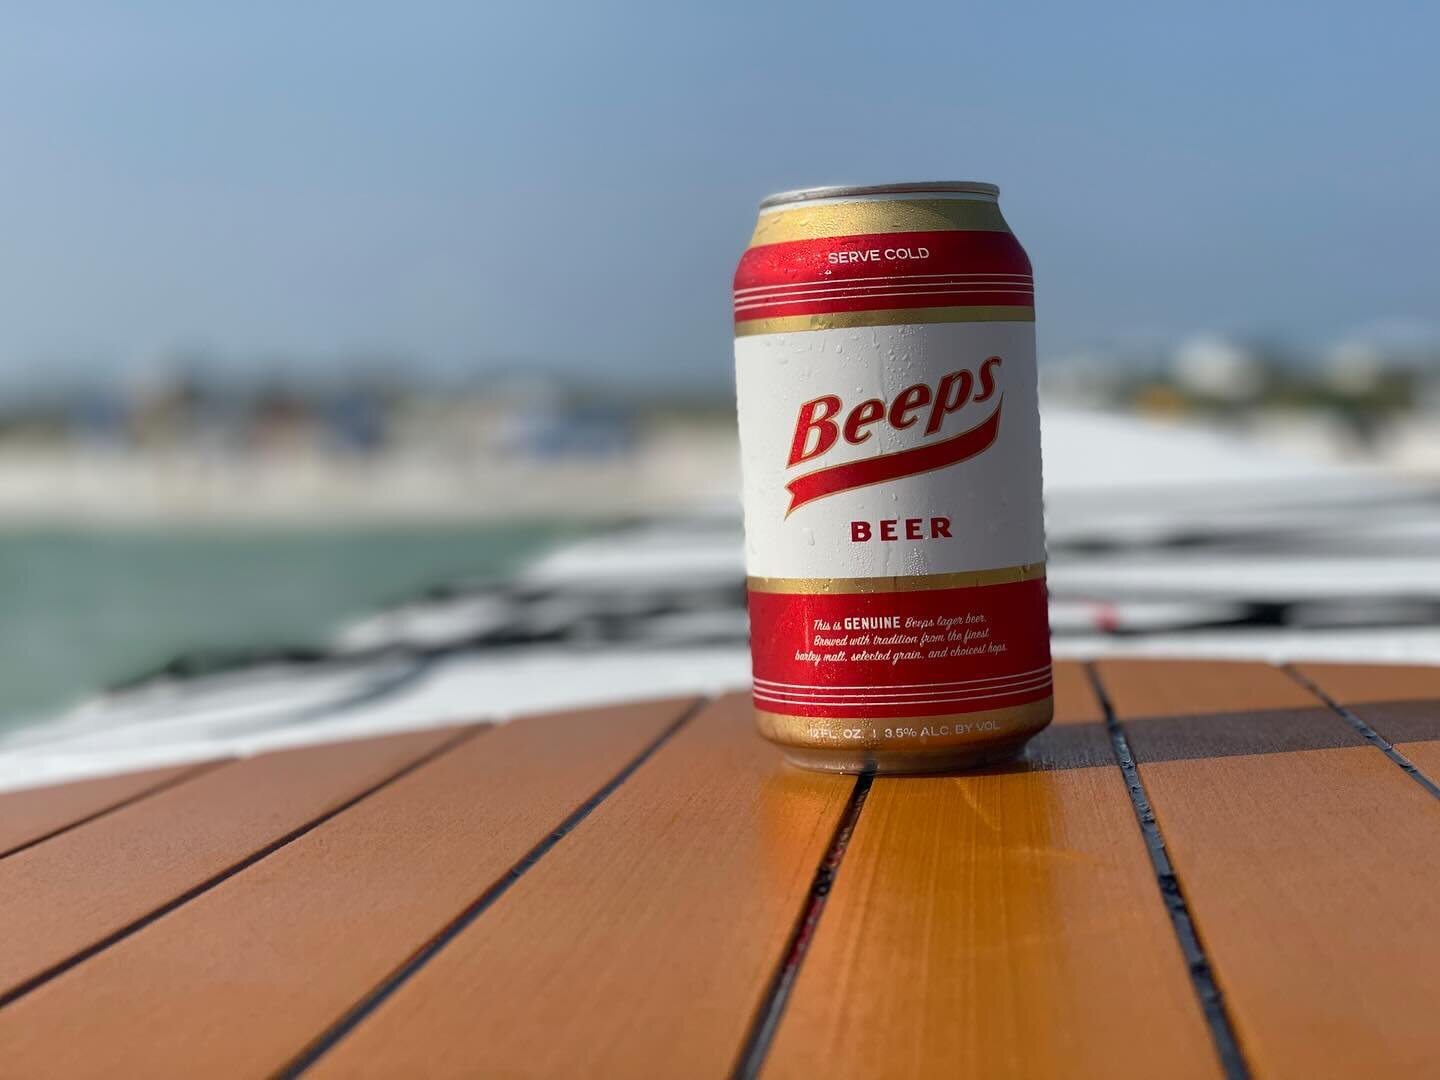 This warming weather is calling for Beeps. Our low-alc 3.5% classic American lager is now available in Kroger and wherever fine beers are sold. &ldquo;When the working day is done and you&rsquo;re wanting more than one. It&rsquo;s got to be Beeps!&rd